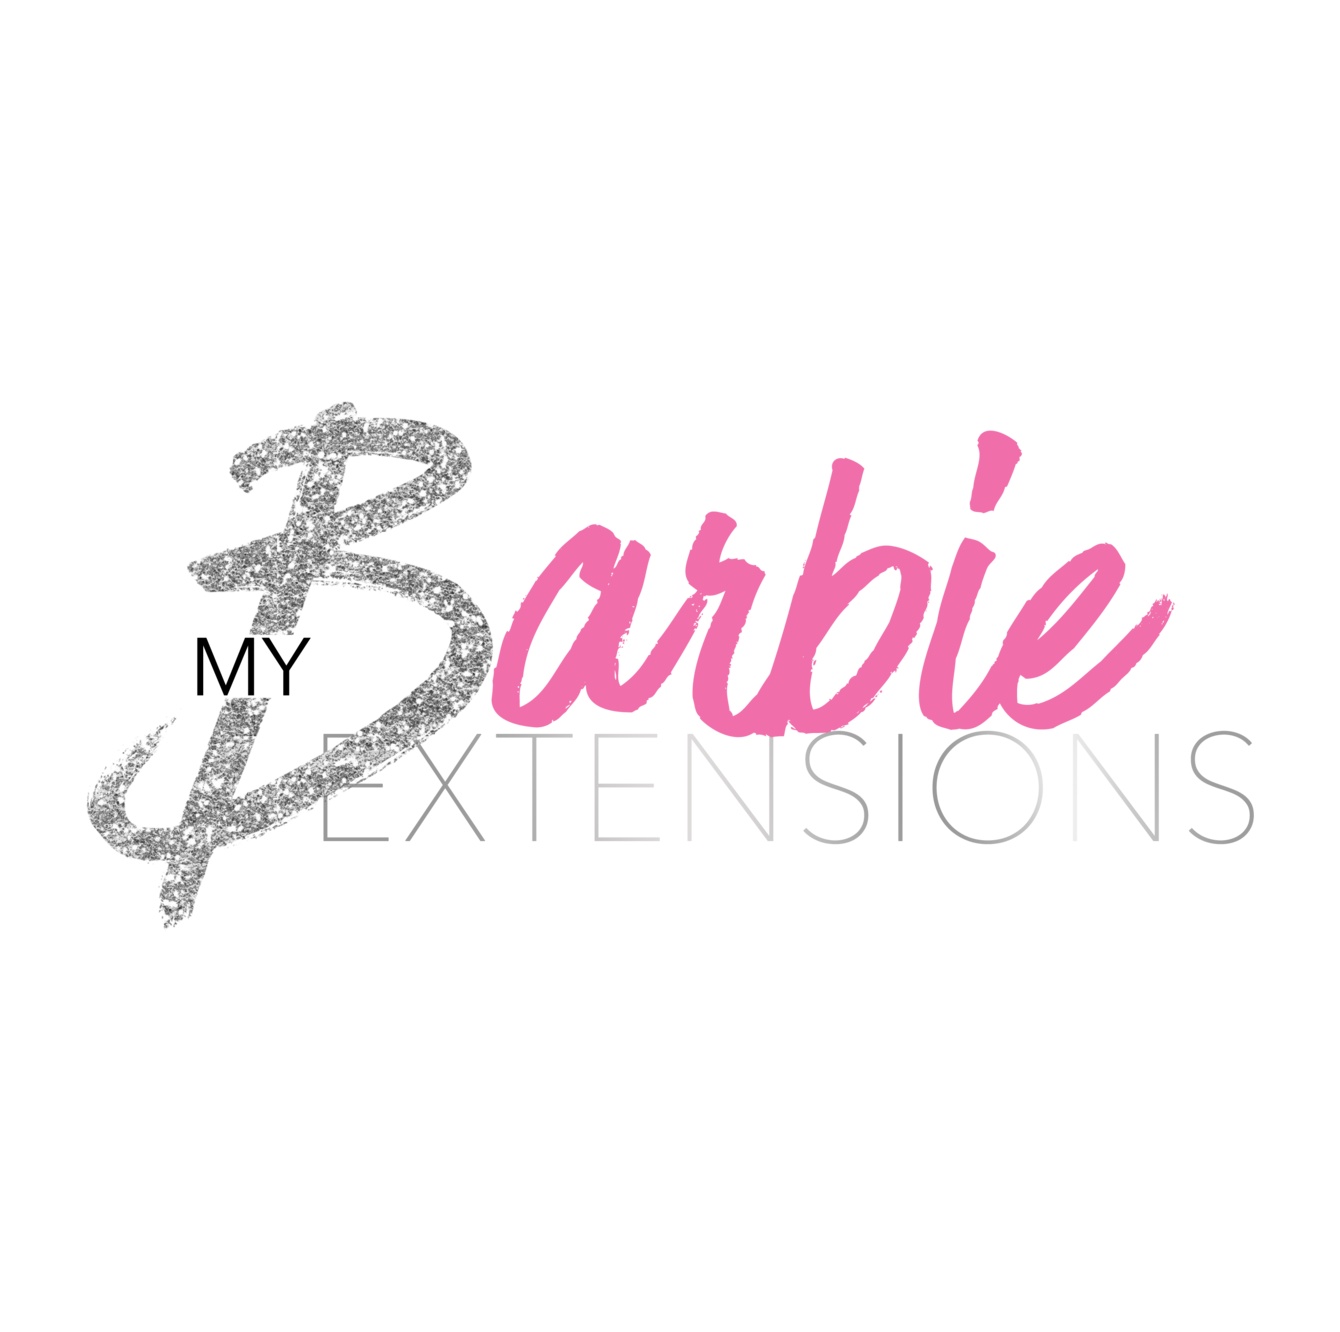 my barbie extension